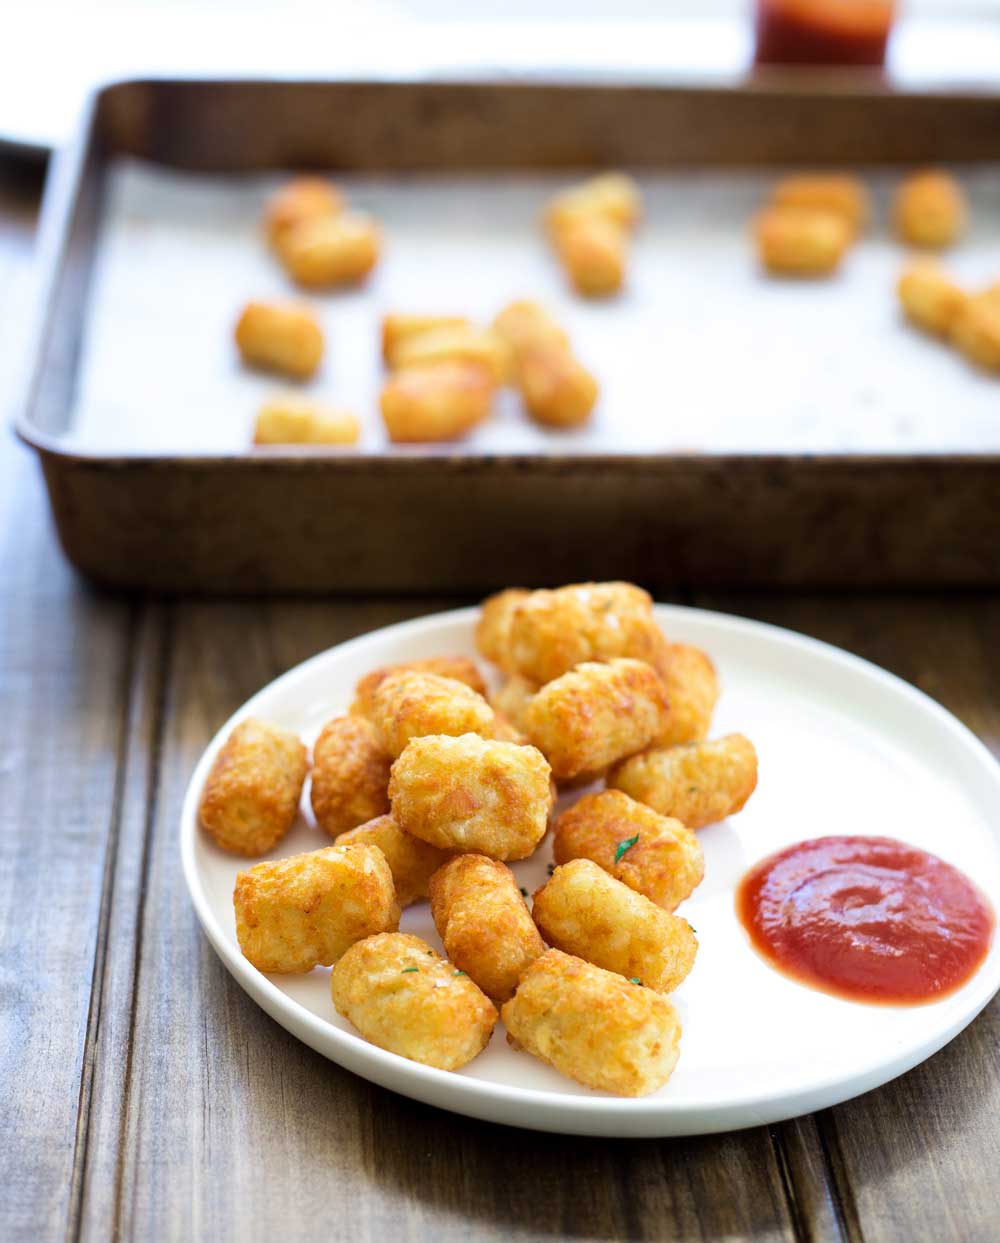 a white plate of tater tots with a. pool of tomato ketchup in the side on a wooden table